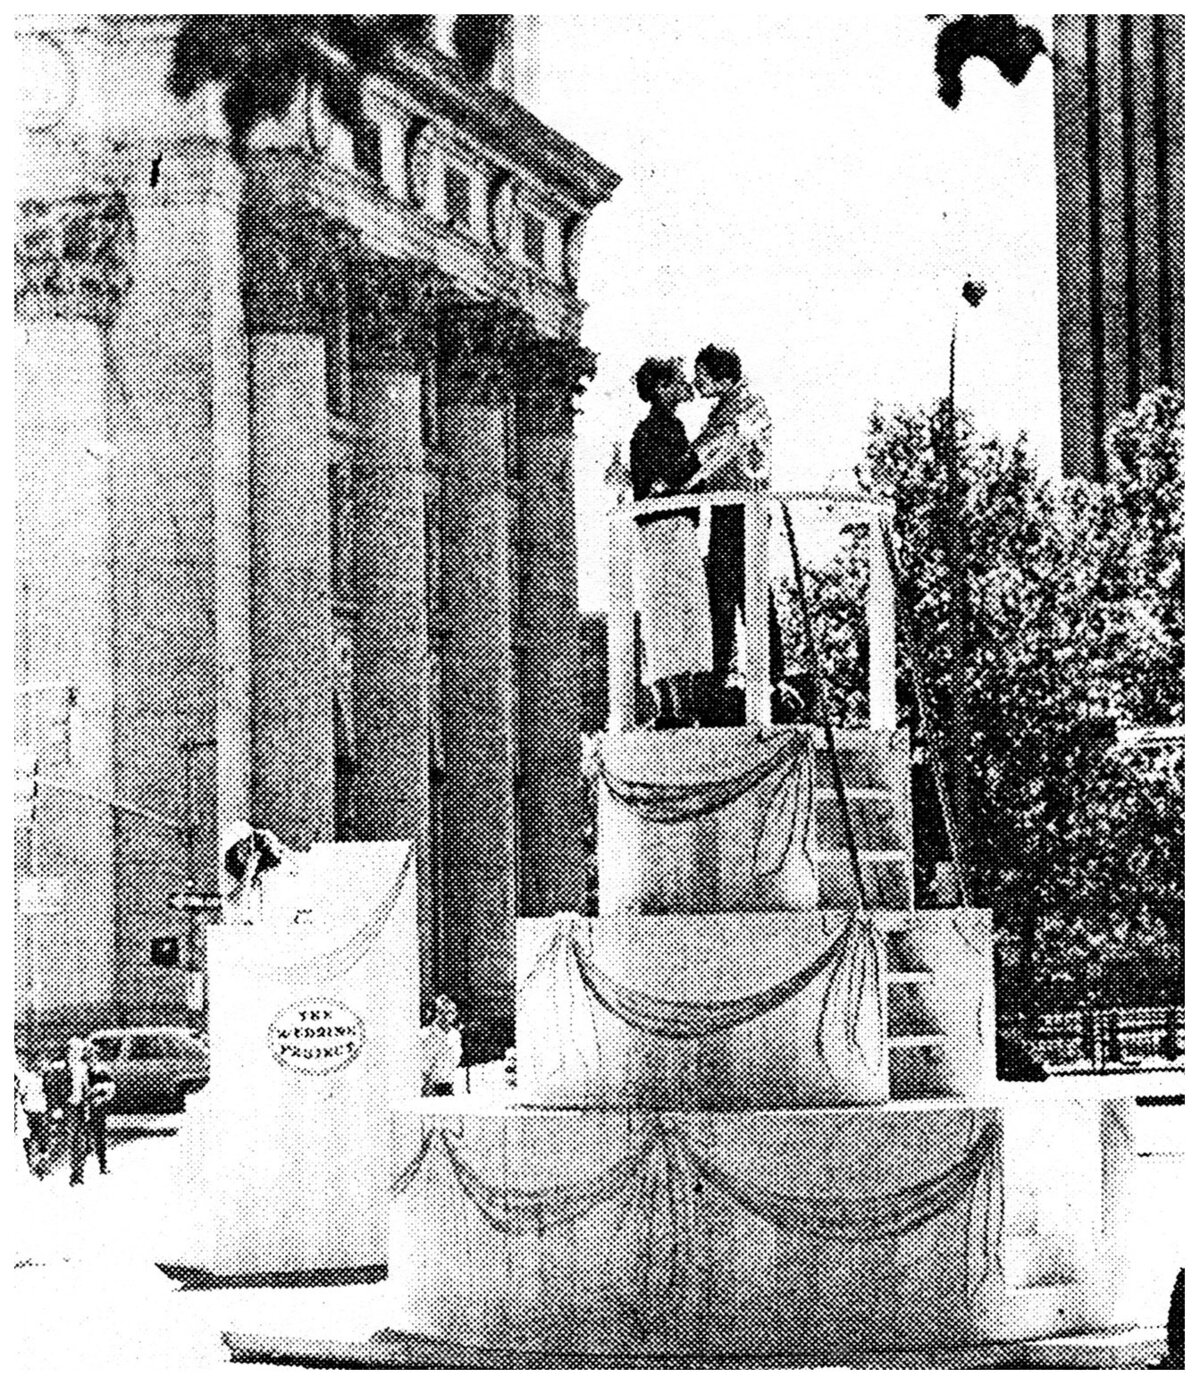 couple kissing on a giant wedding cake outside of city hall in black and white